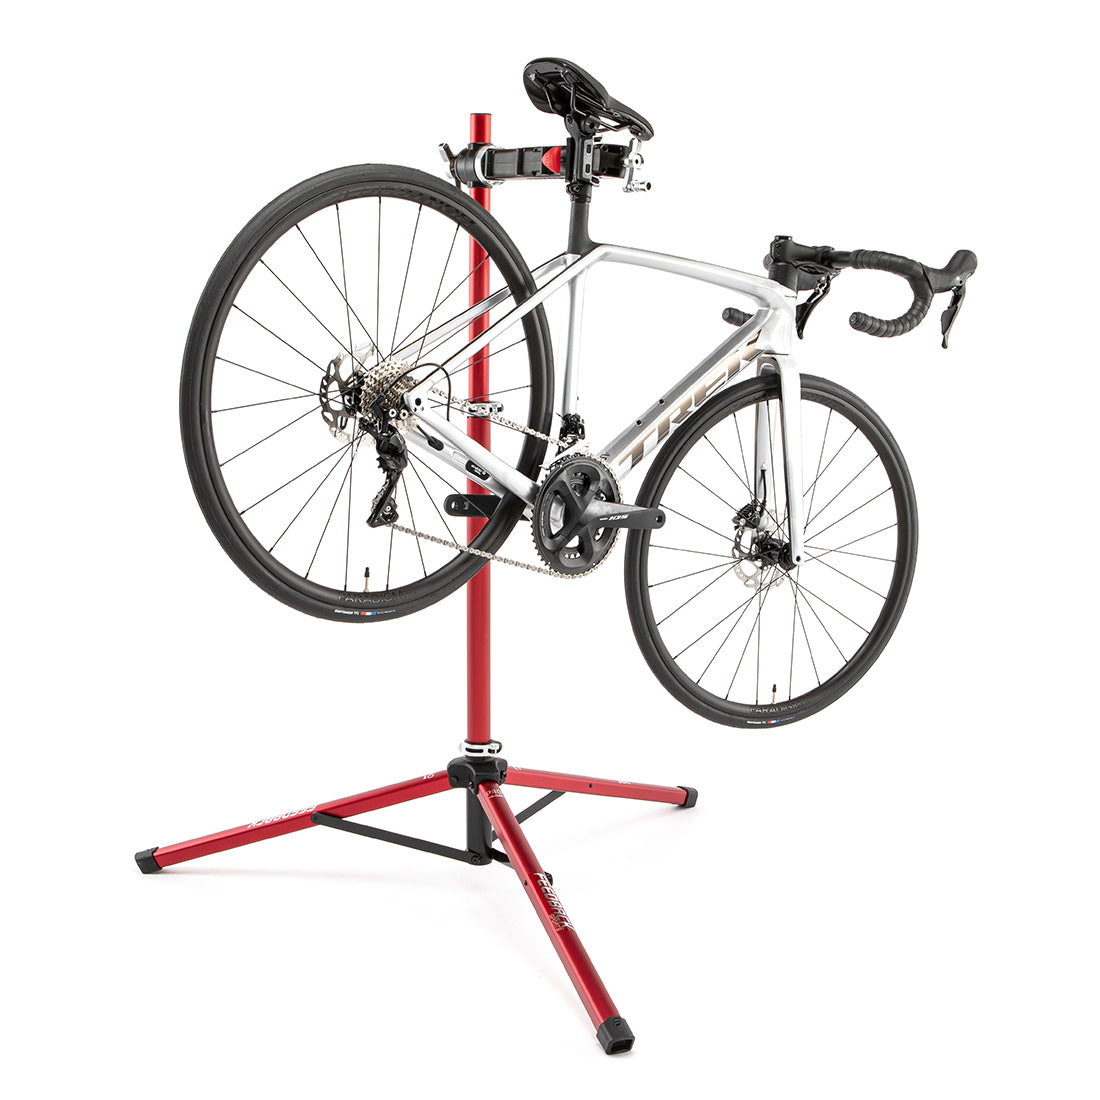 Pro Mechanic bike repair stand with road bike installed for use on white background.